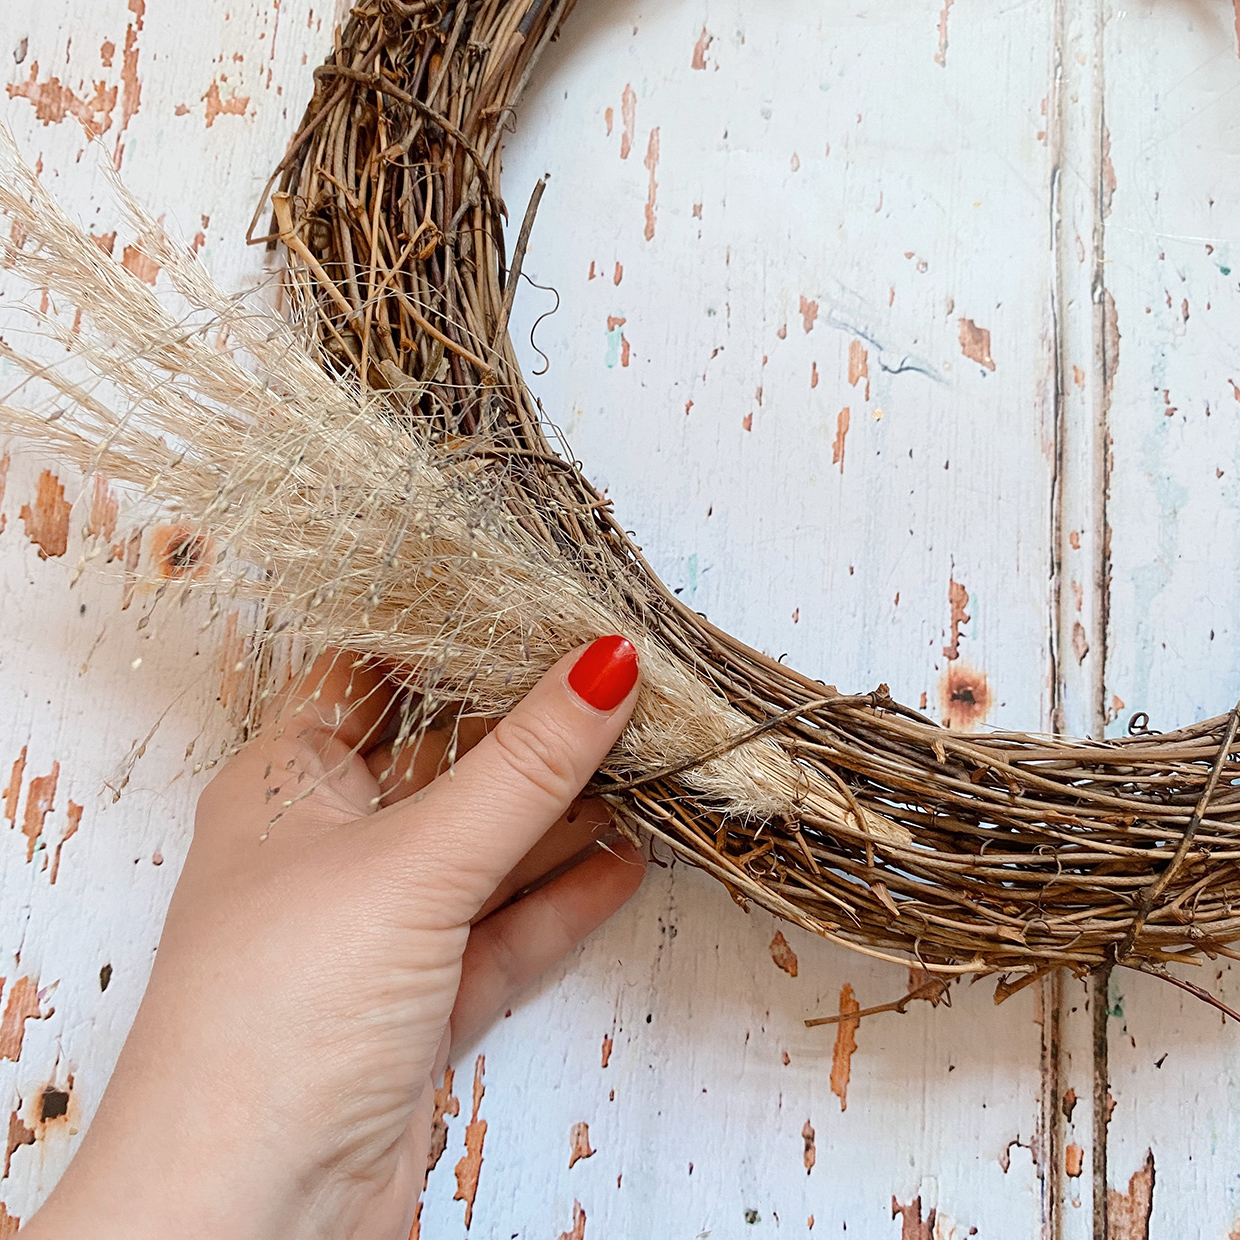 How to make an Autumn wreath – weave the pampas grass in the wreath base